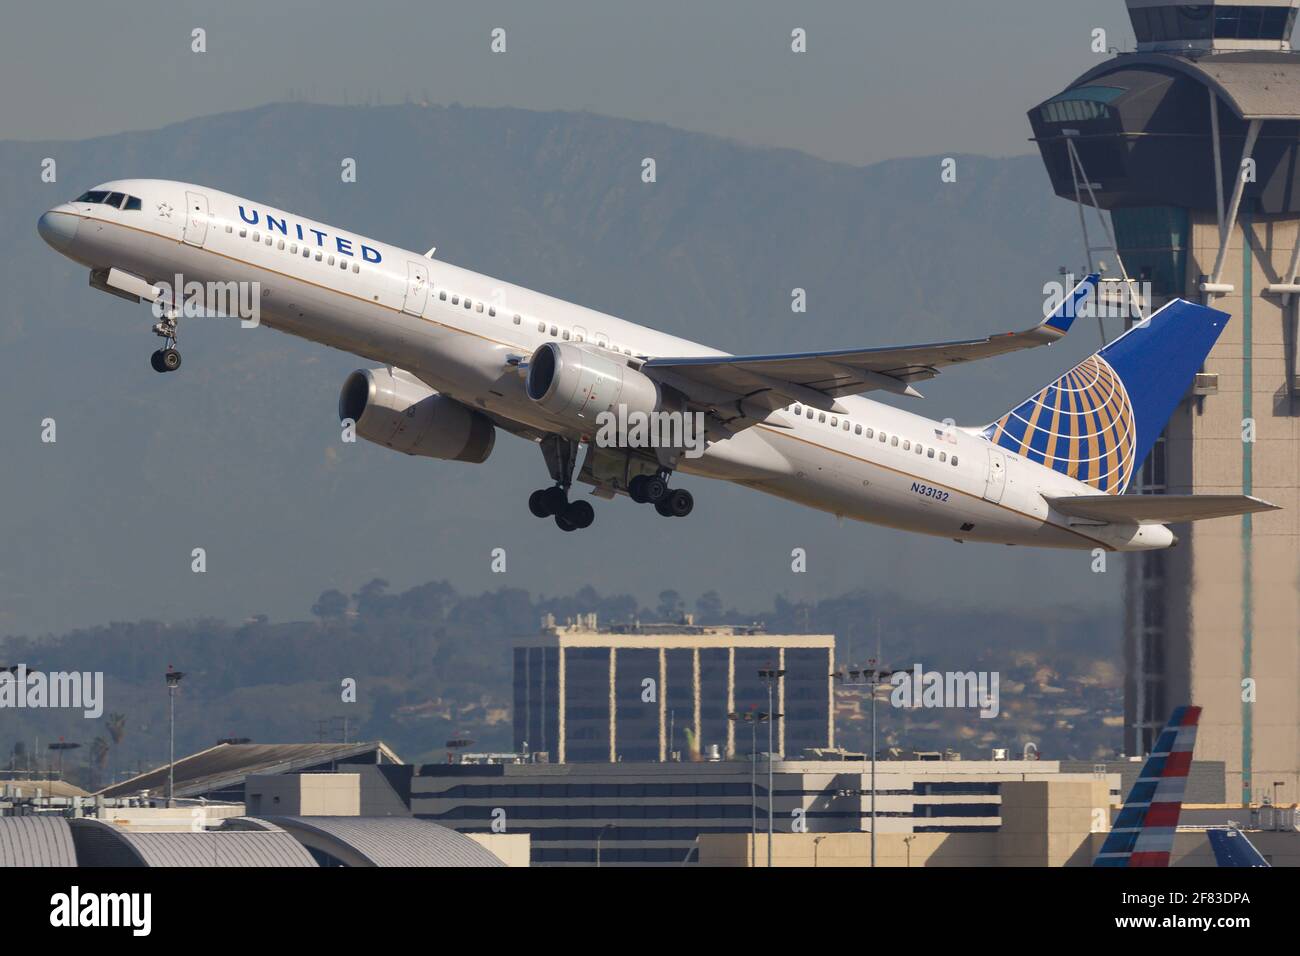 Los Angeles, USA - 20. February 2016: United Airlines Boeing 757-200 at Los Angeles airport (LAX) in the USA. Boeing is an aircraft manufacturer based Stock Photo